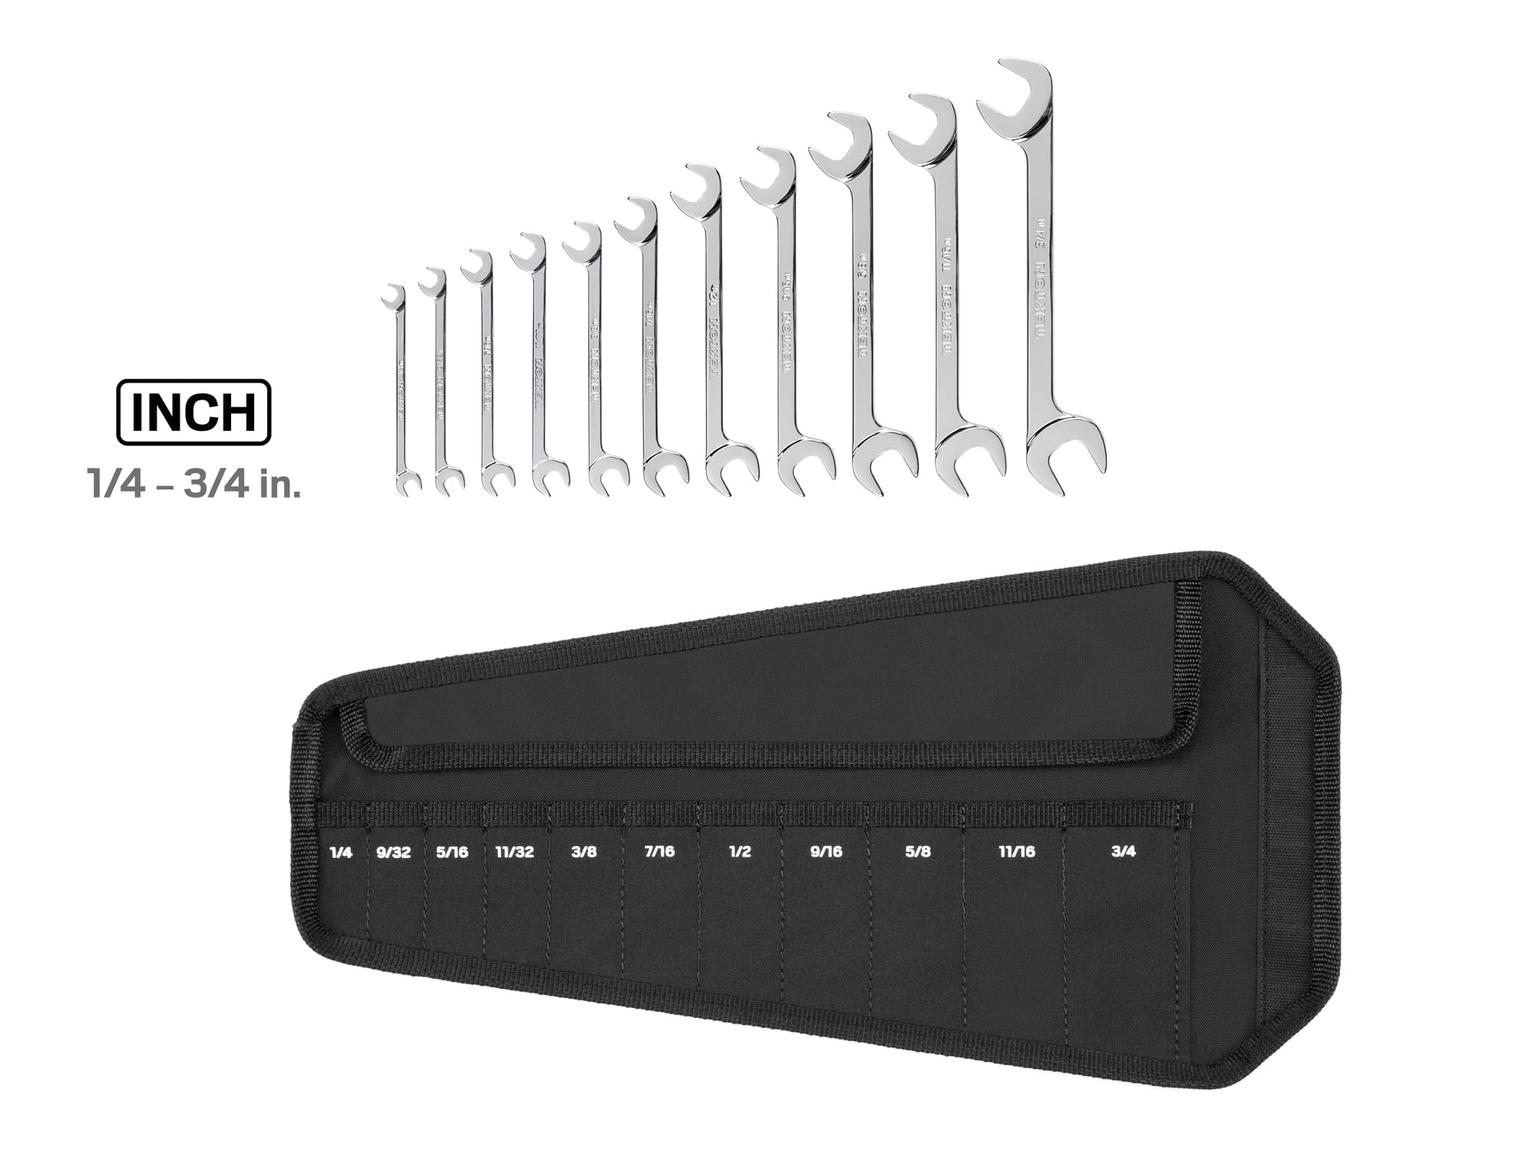 TEKTON WAE92101-T Angle Head Open End Wrench Set with Pouch, 11-Piece (1/4 - 3/4 in.)